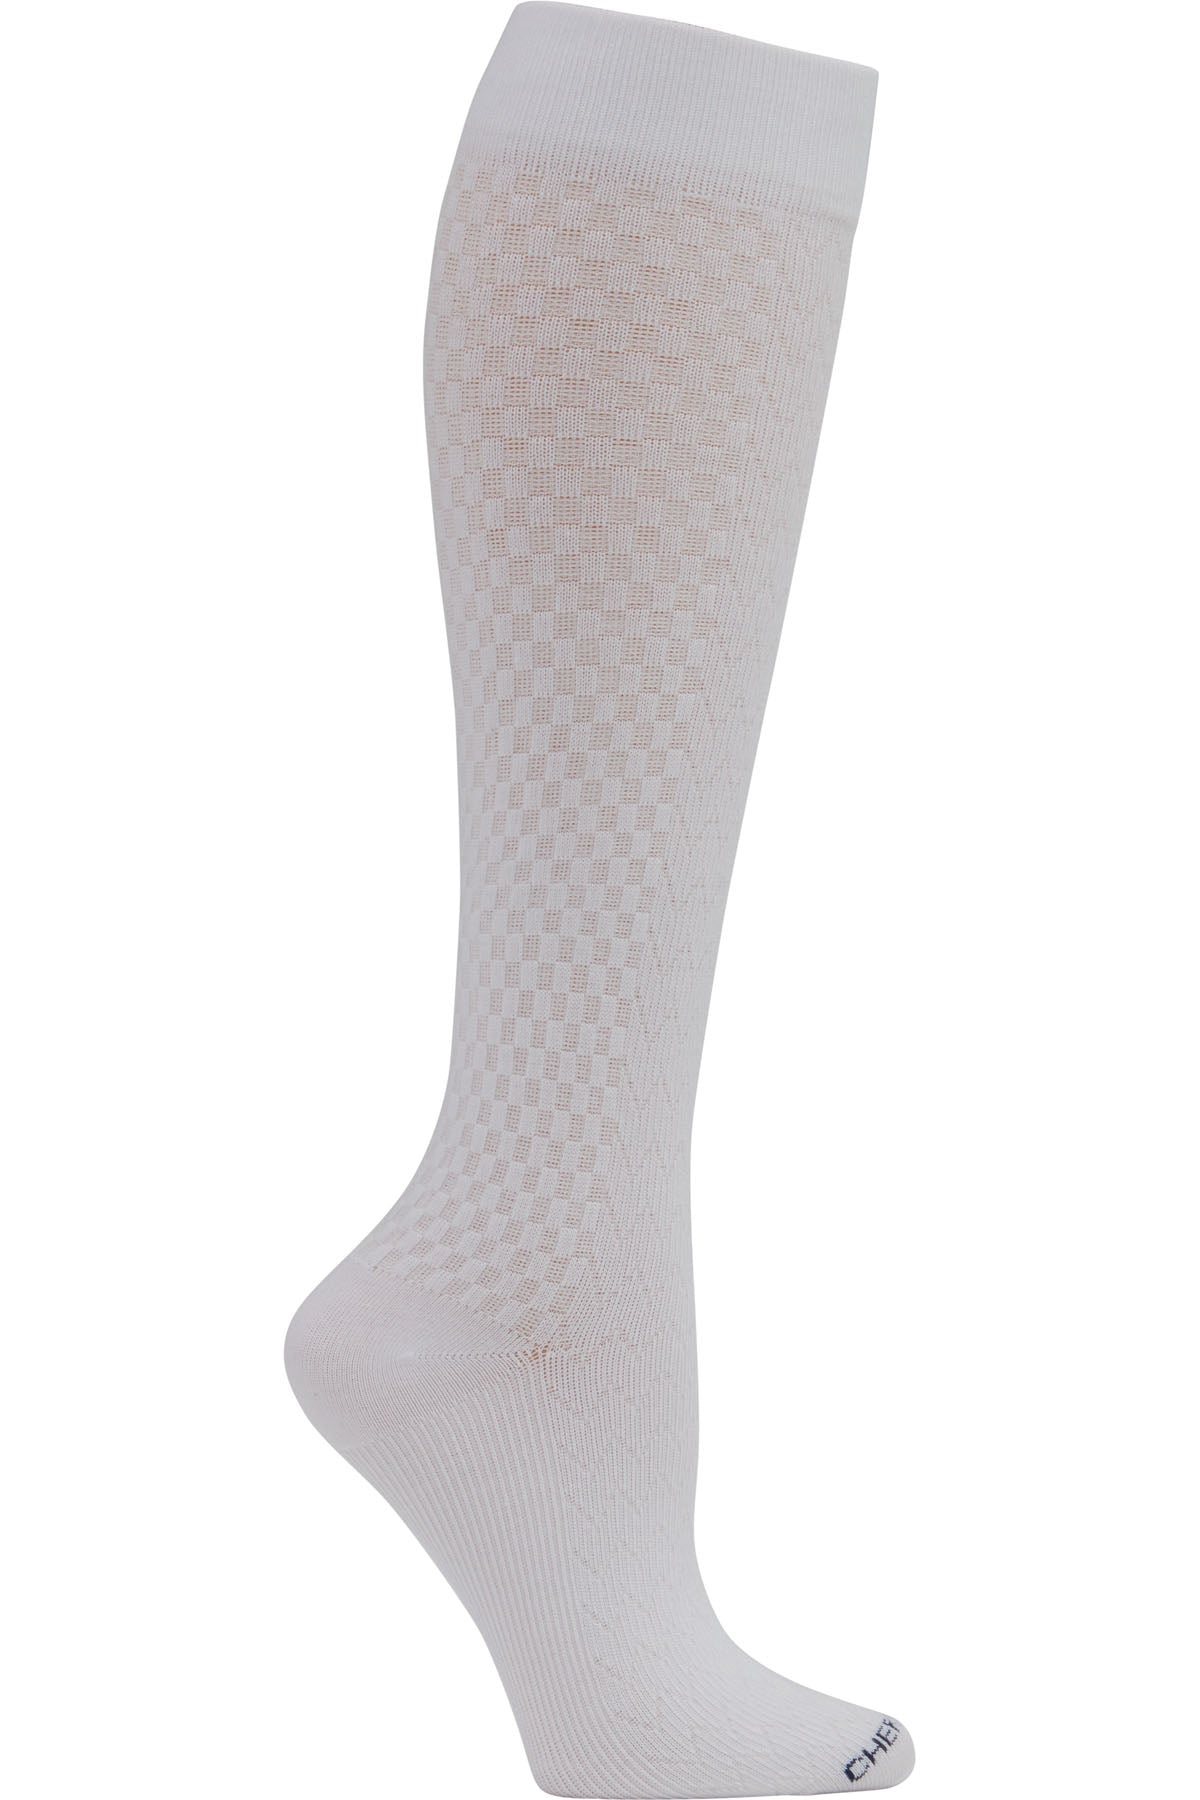 Cherokee Plus Size Mild Compression Wide Calf Socks True Support 10-15 mmHg in White at Parker's Clothing and Shoes.